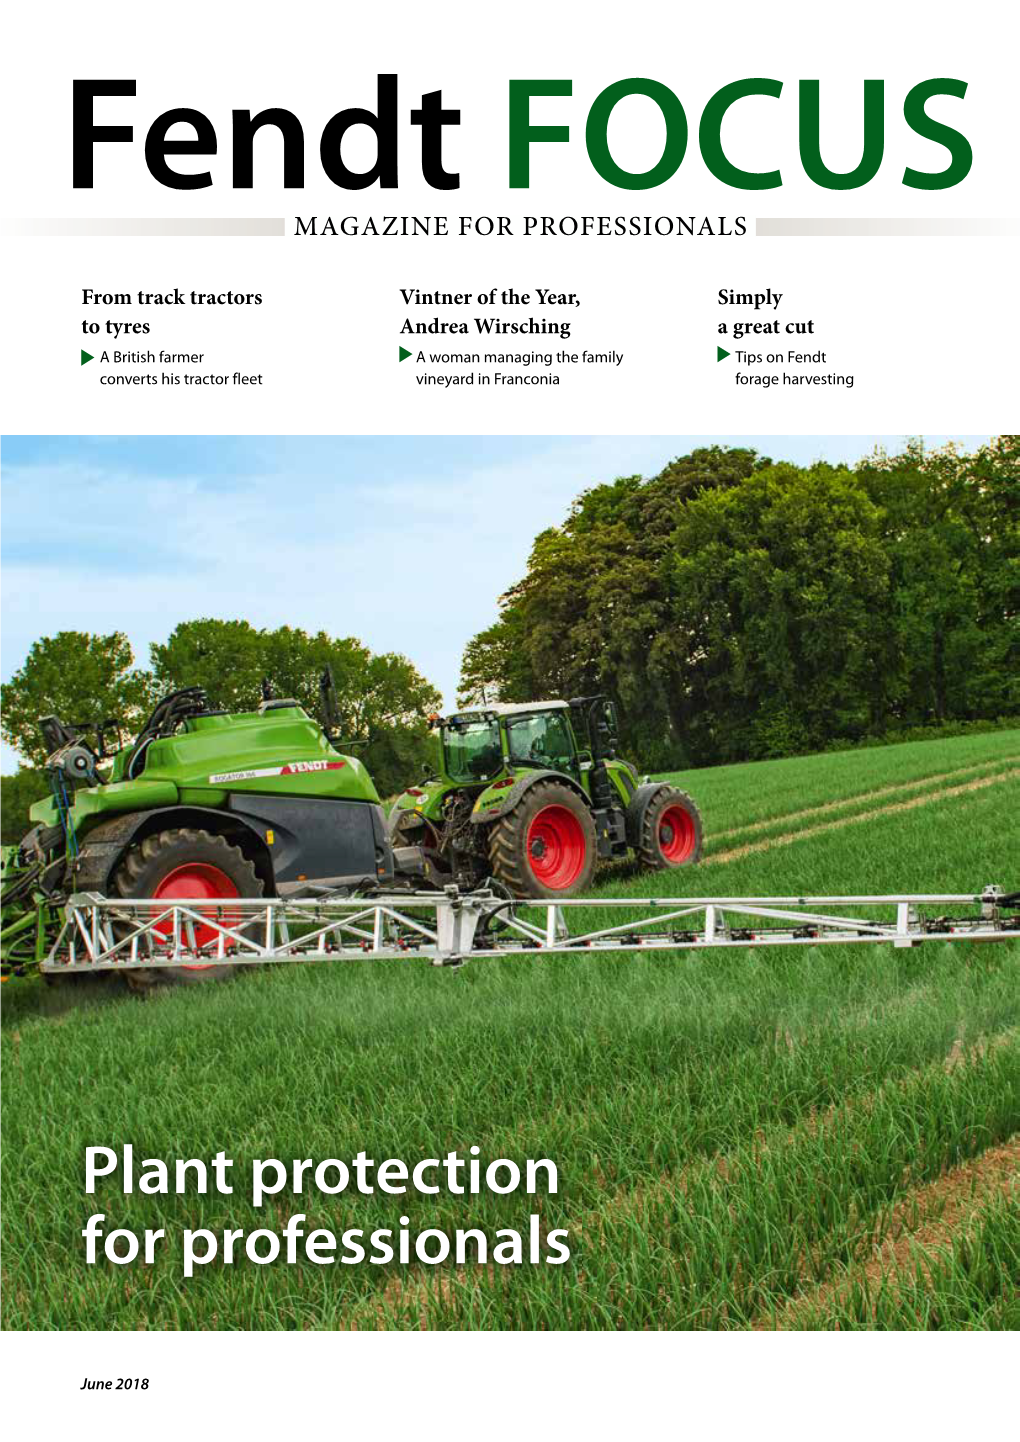 Plant Protection for Professionals